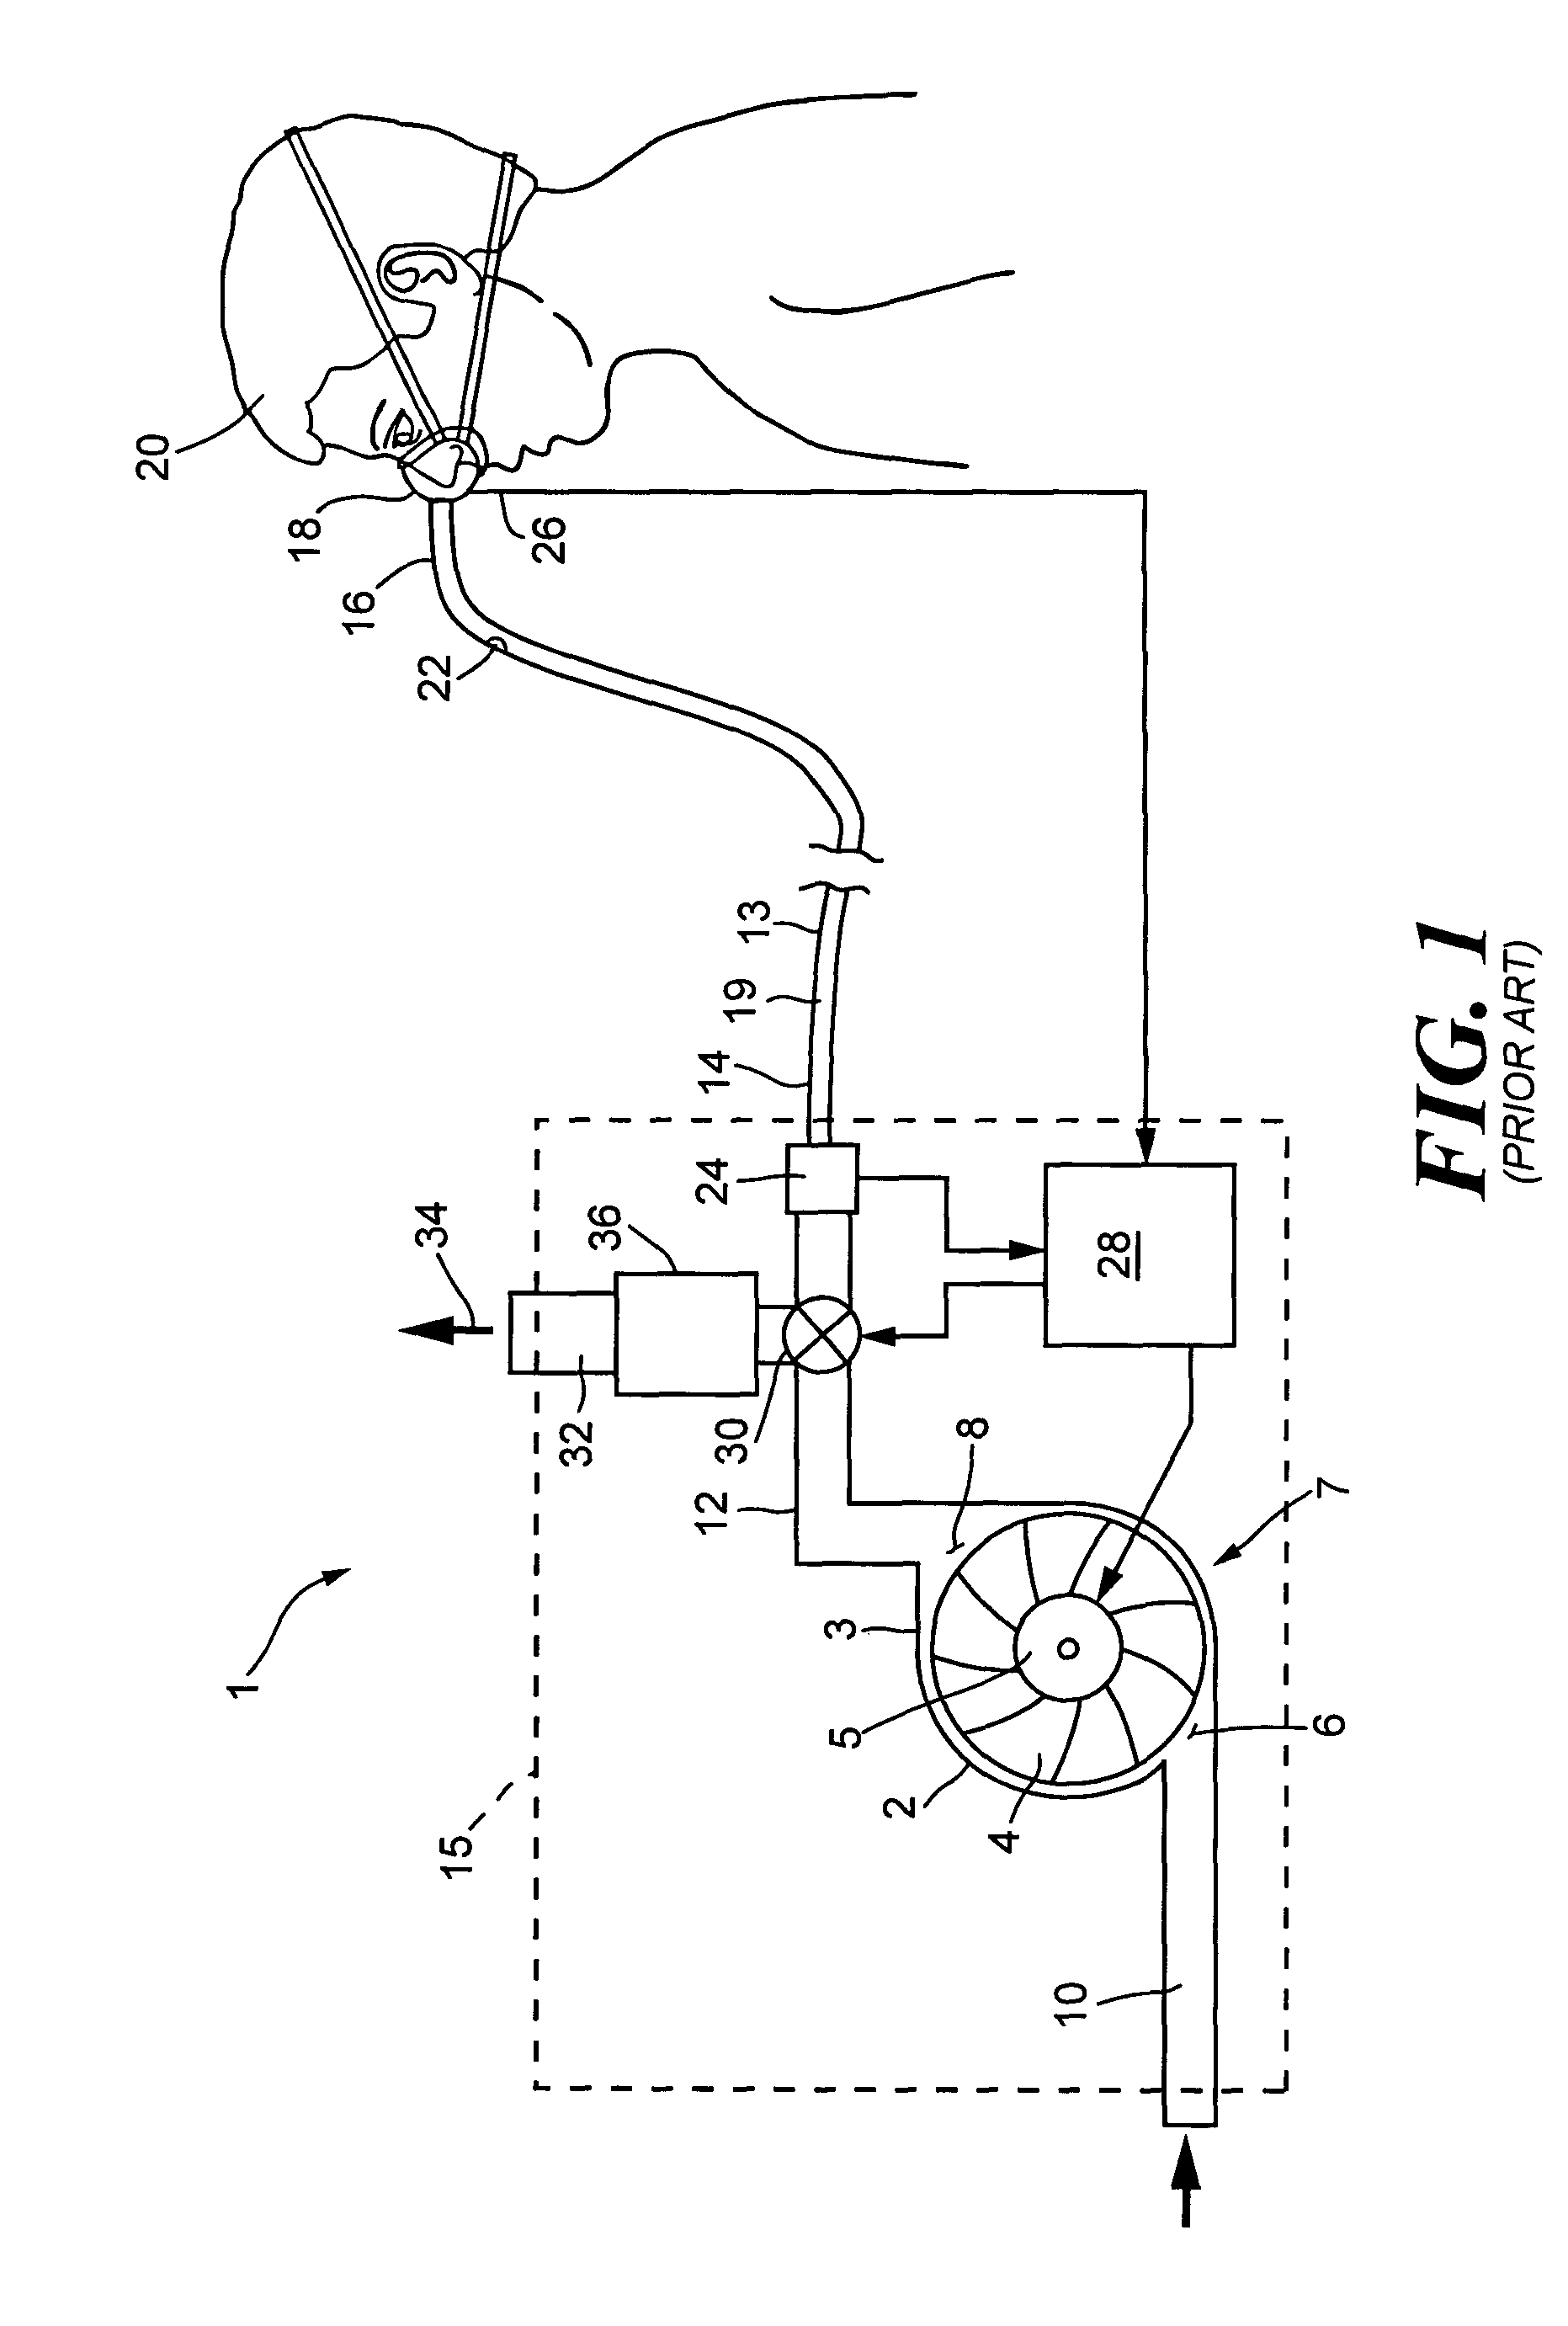 Pressure support system and method and a pressure control valve for use in such a system and method